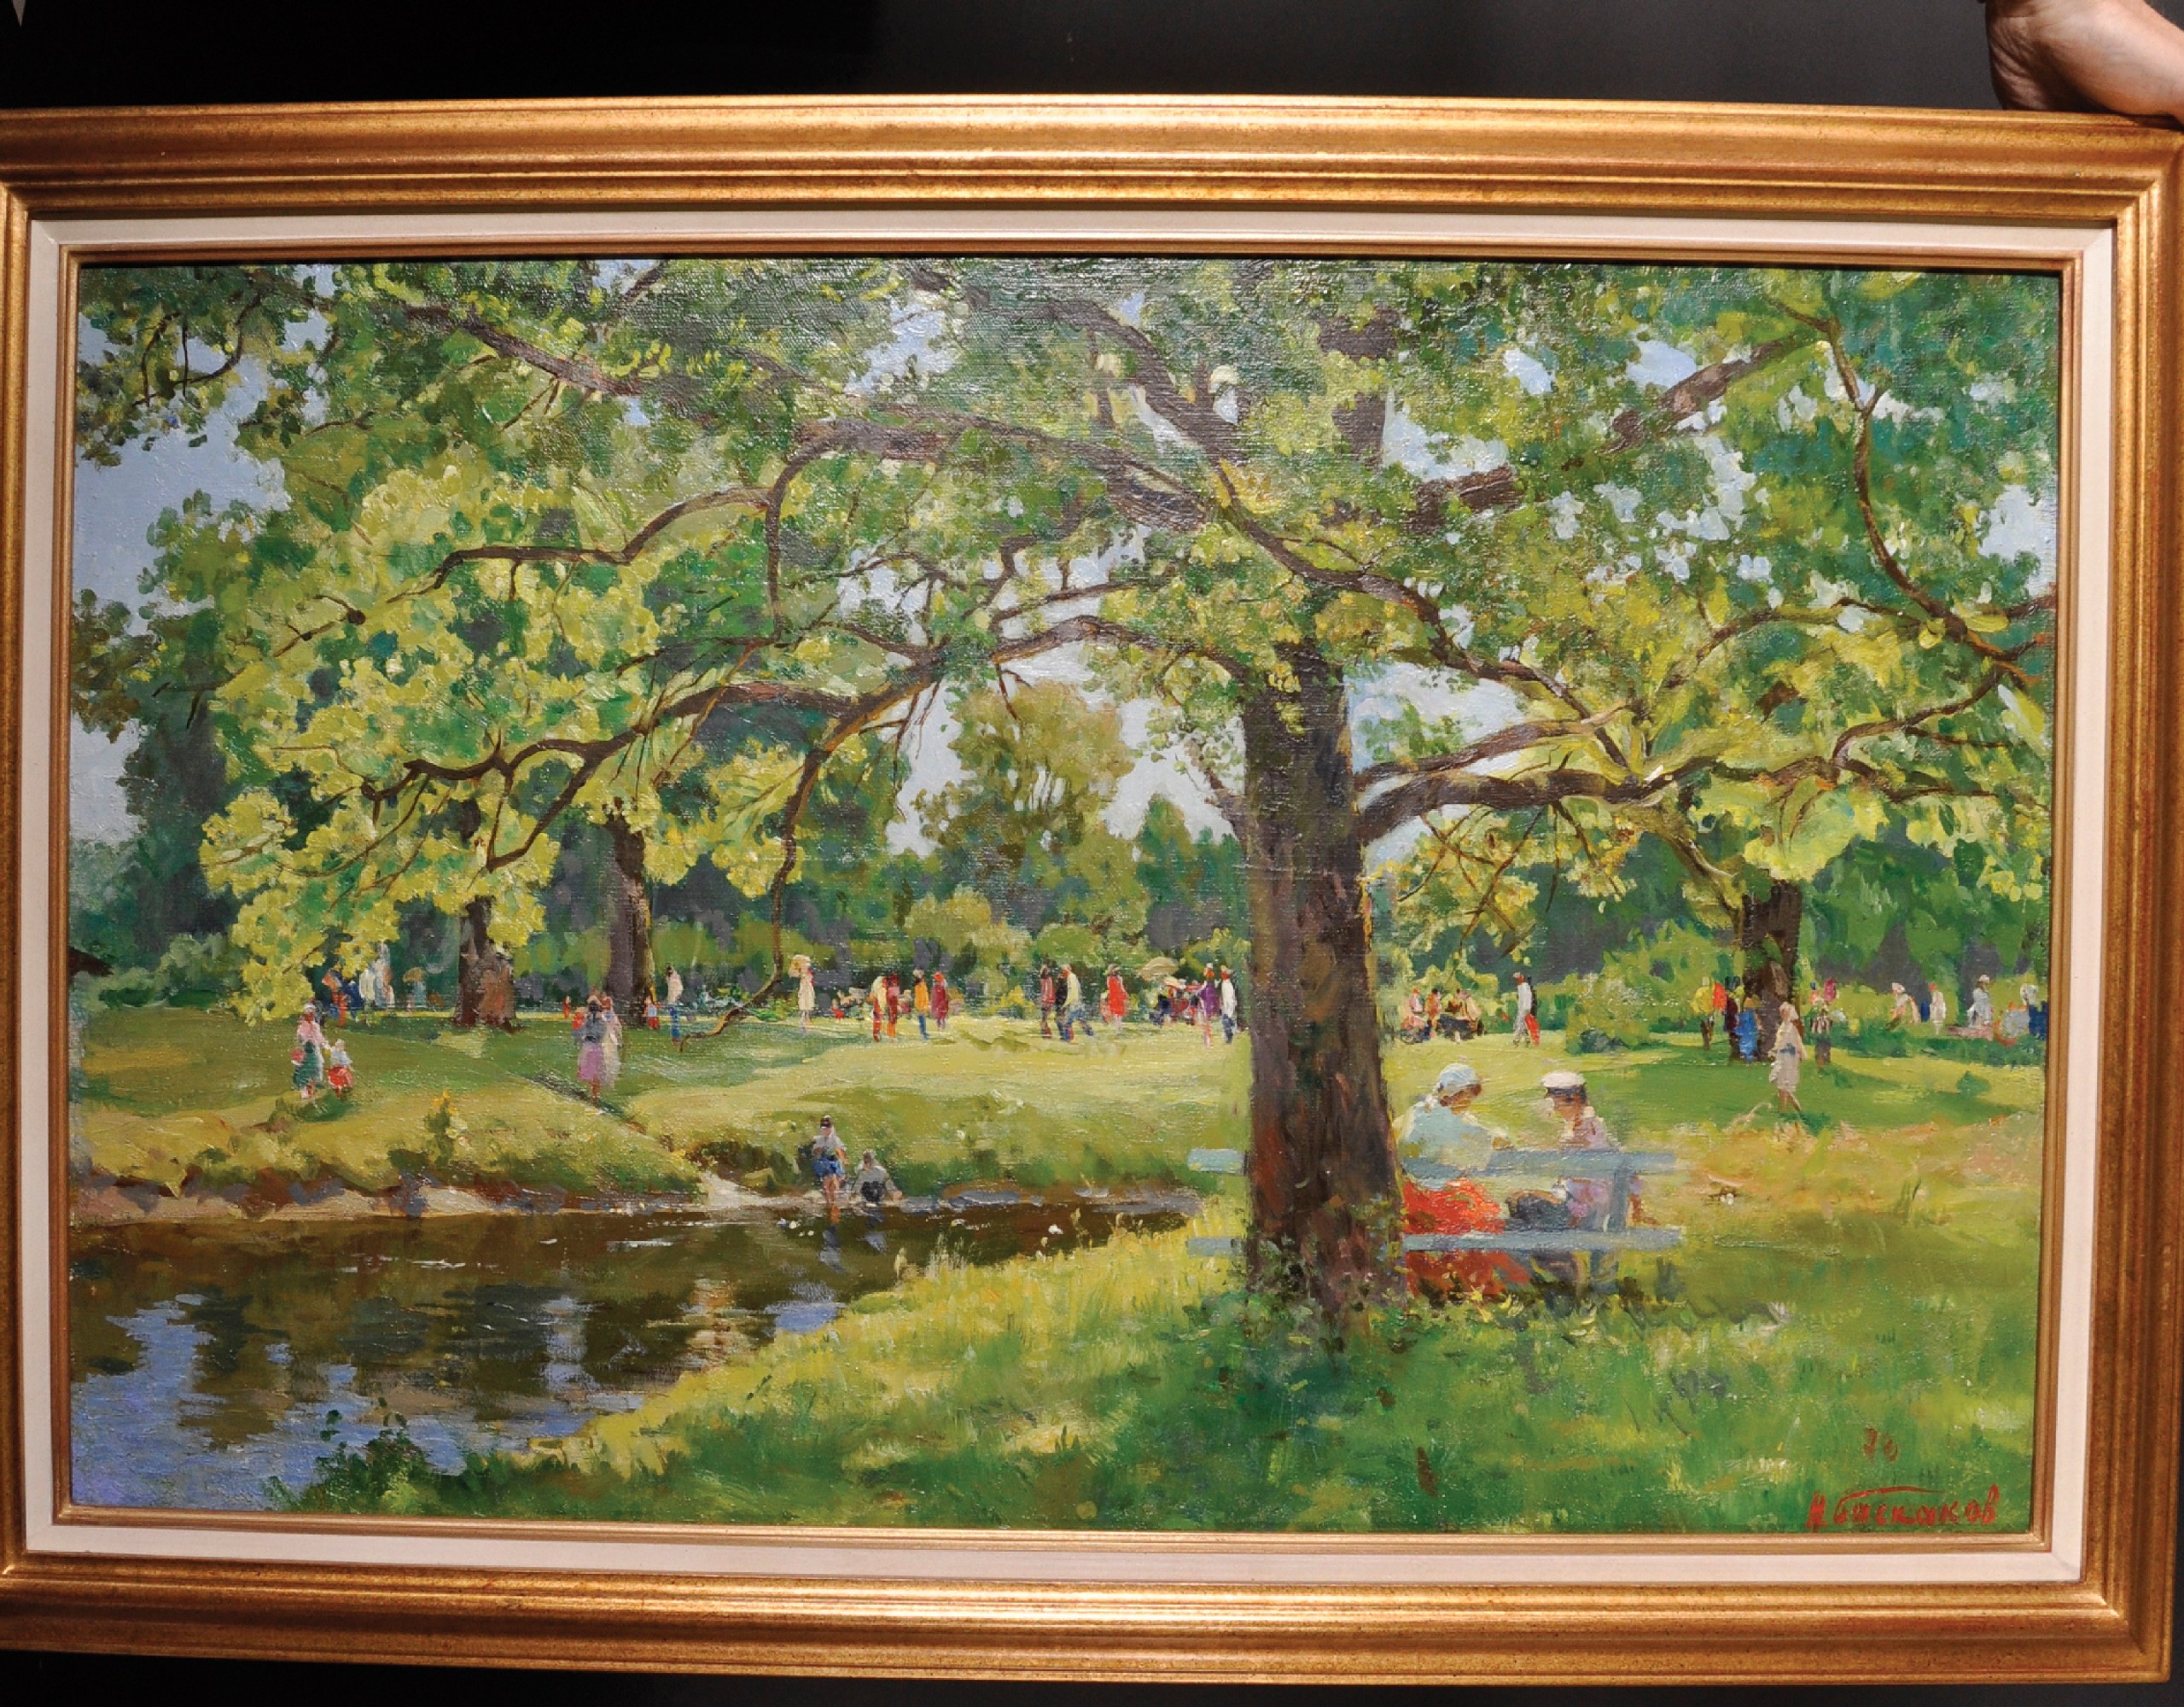 Nikolai Nikolaevitch Baskakov (1918-1993) Russian. "In the Park", with Figures by a River Bank, - Image 4 of 5